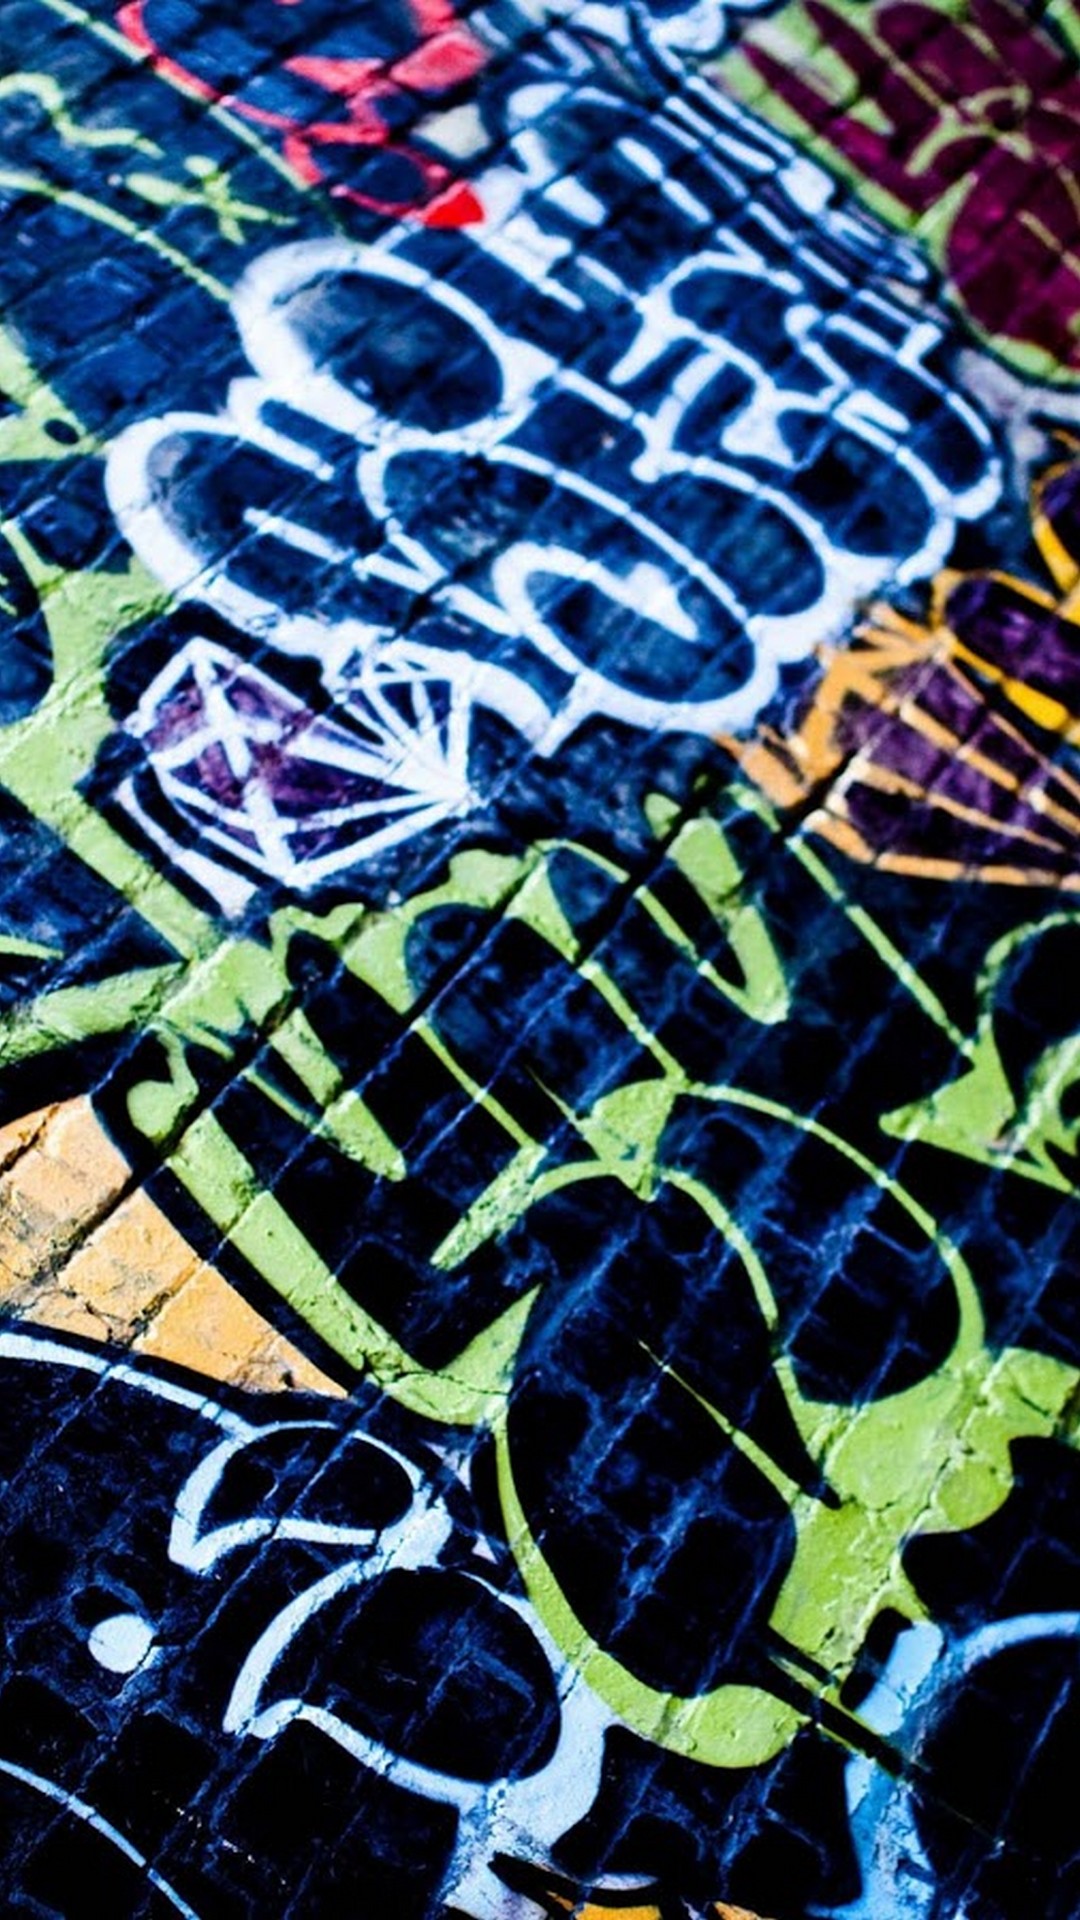 Graffiti Wallpaper Android with resolution 1080X1920 pixel. You can make this wallpaper for your Android backgrounds, Tablet, Smartphones Screensavers and Mobile Phone Lock Screen